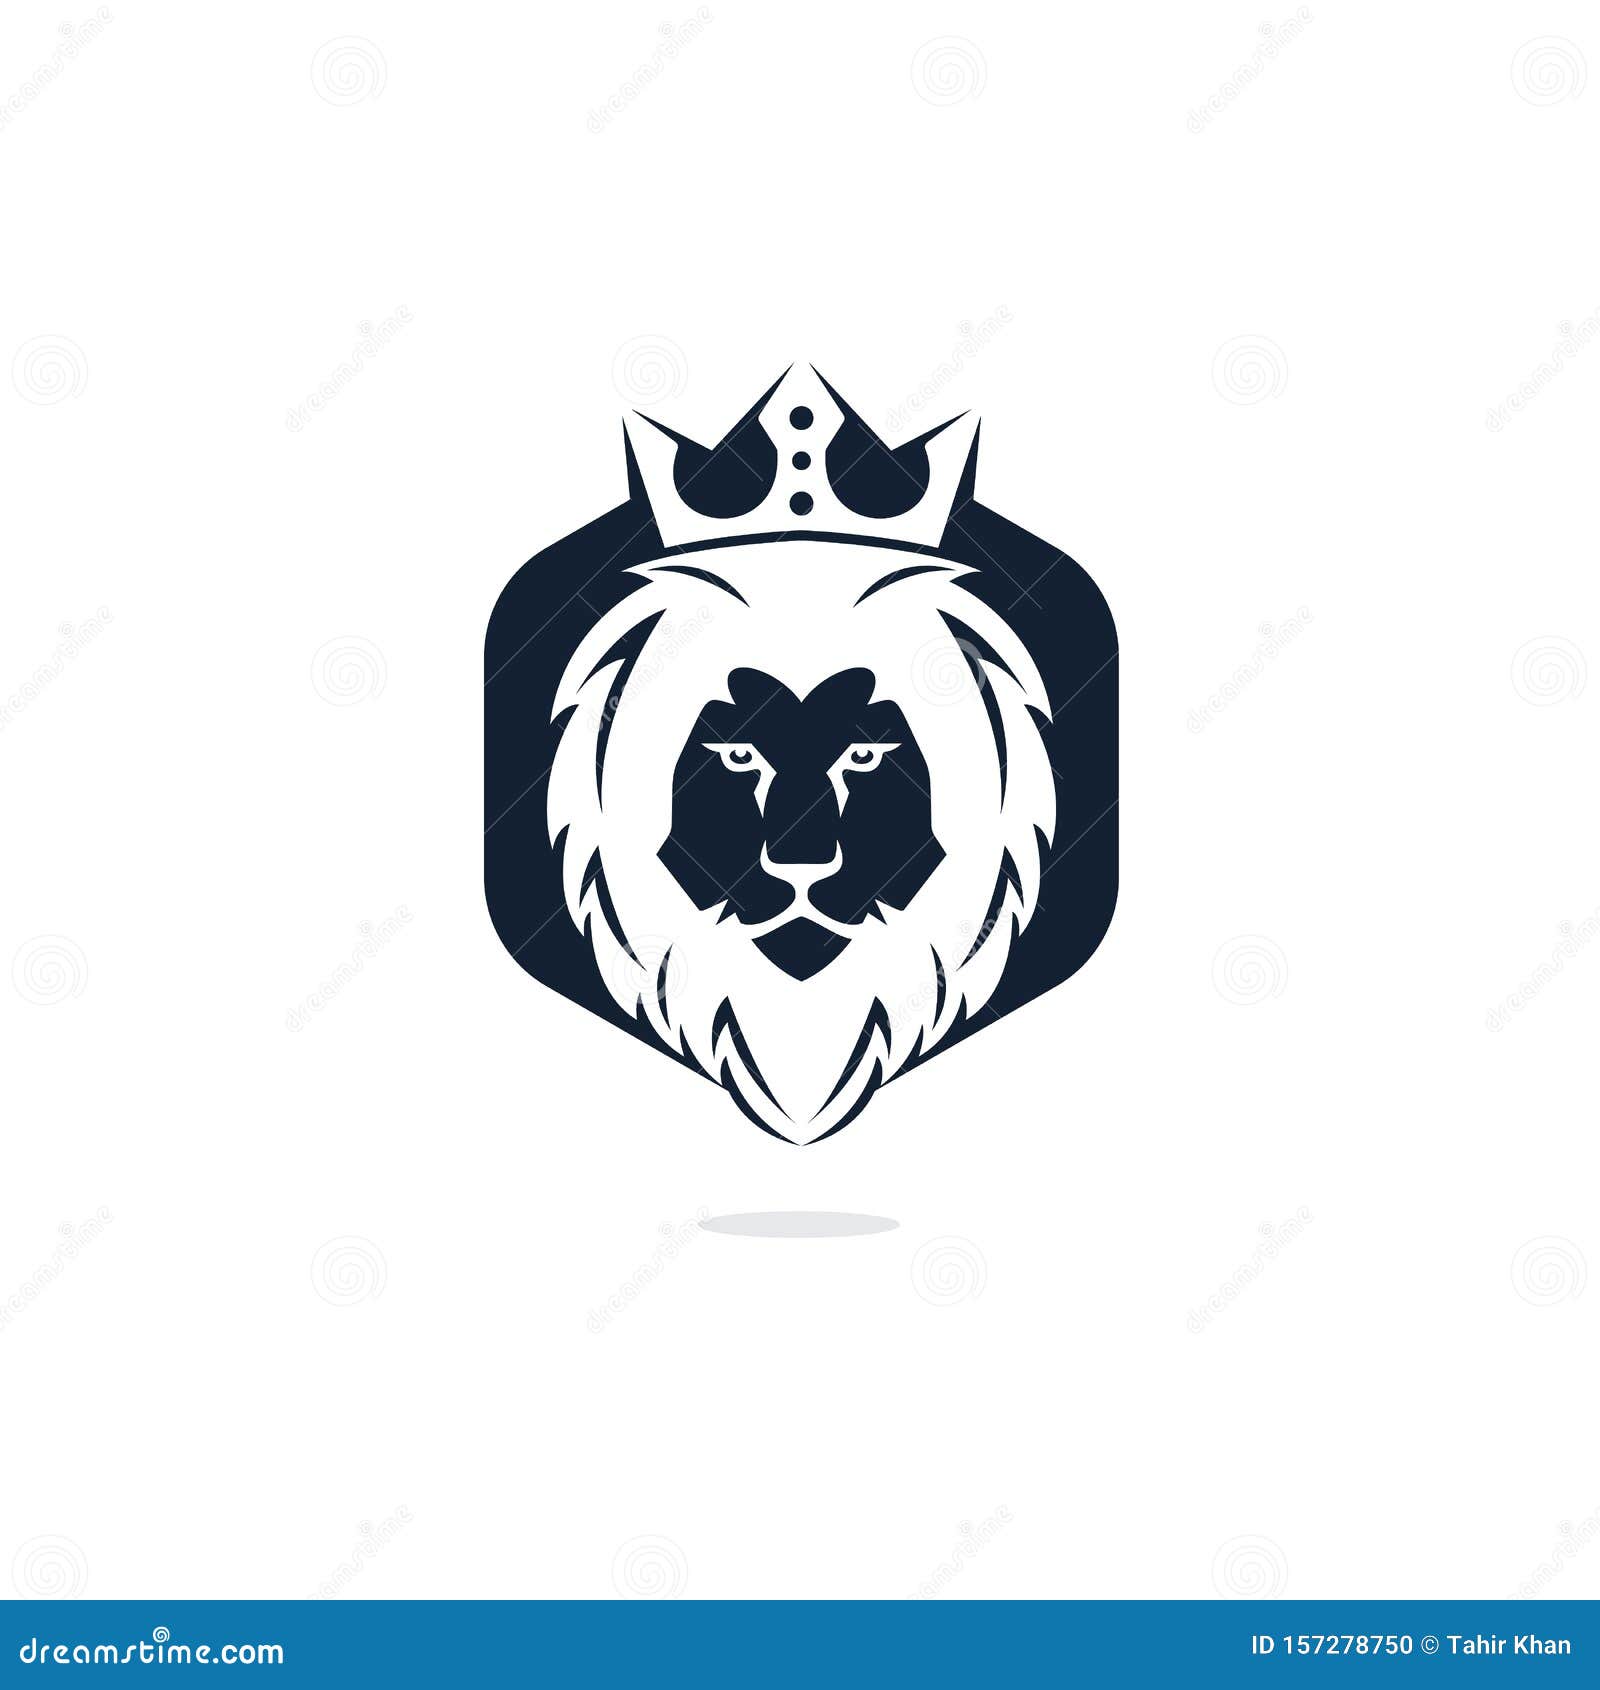 Lion King Head Sign Concept. Stock Vector - Illustration of conceptn ...